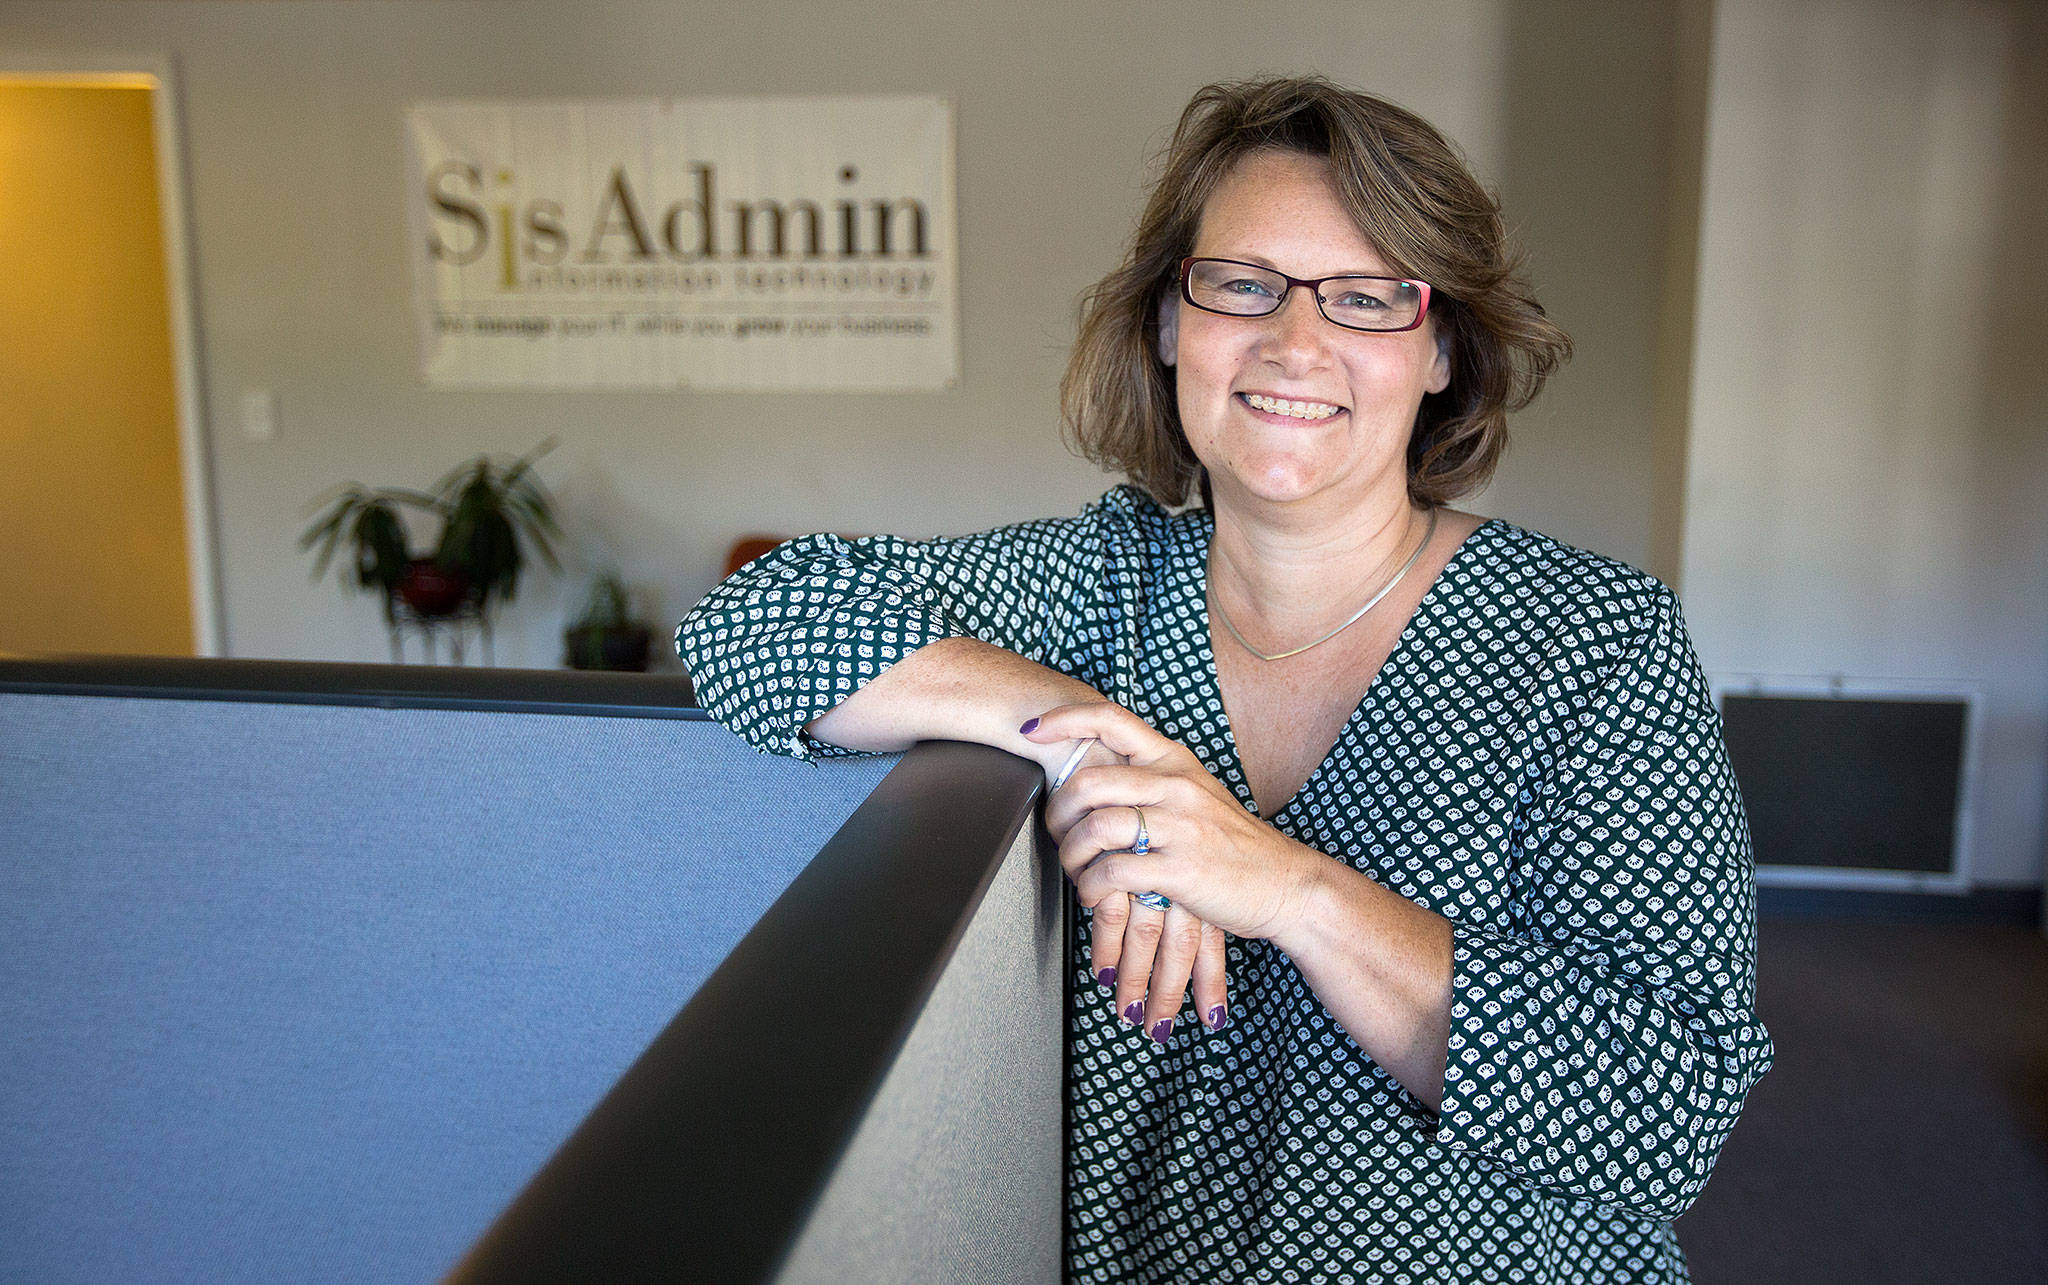 Mary Burris, founder of SisAdmin, stands in the new location on Cedar Avenue in Snohomish. The company provides IT support to small- and medium-sized businesses ranging from accounting firms to construction companies. (Andy Bronson / The Herald)